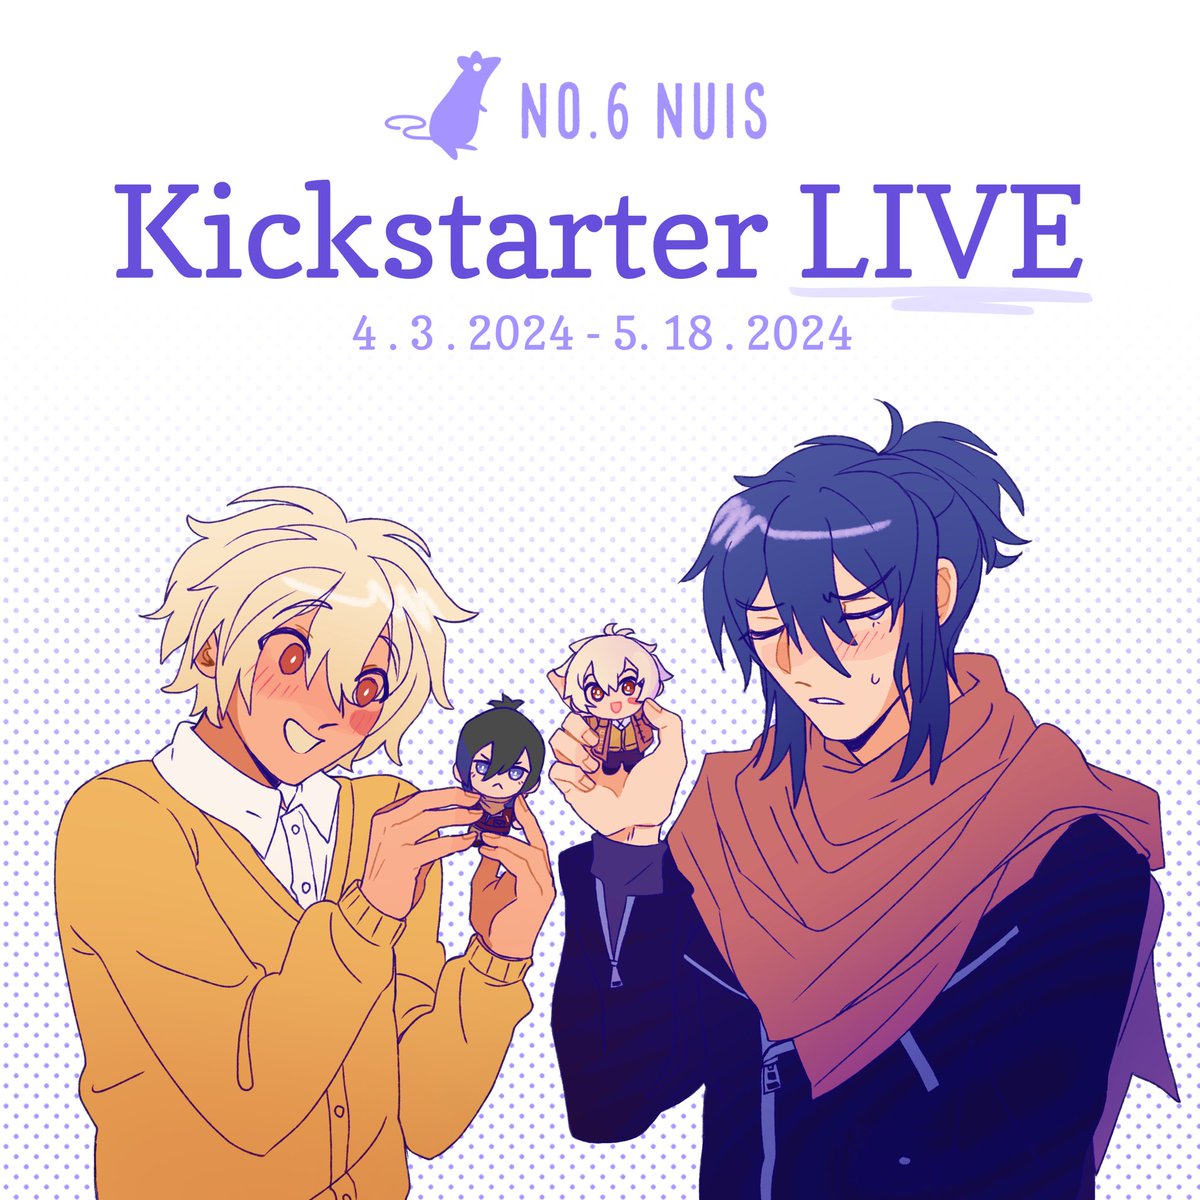 [RTs appreciated!] the time has finally come! The Nezushi nui kick/starter is LIVE 4/3 - 5/18! head to the KS page for info on tiers, bts, and more! Raffle info soon to come, keep an eye out! #no6 #nezushinuis #nezushi KS 💚 shorturl.at/ivCDZ 🐁 no6nuis.carrd.co